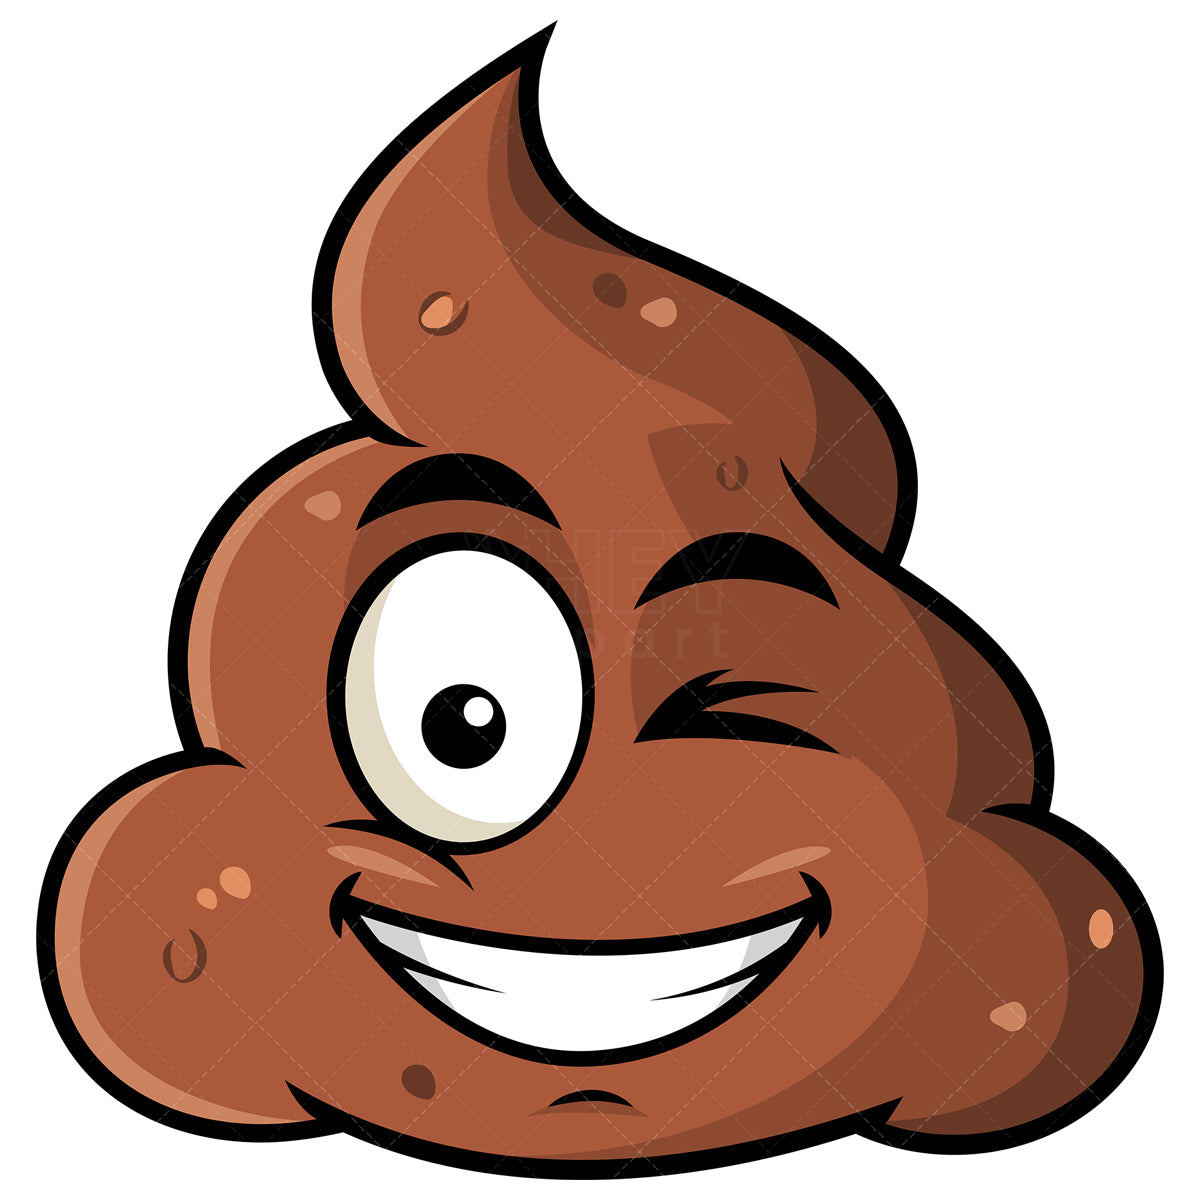 Royalty-free stock vector illustration of a winking and smiling poop emoji.